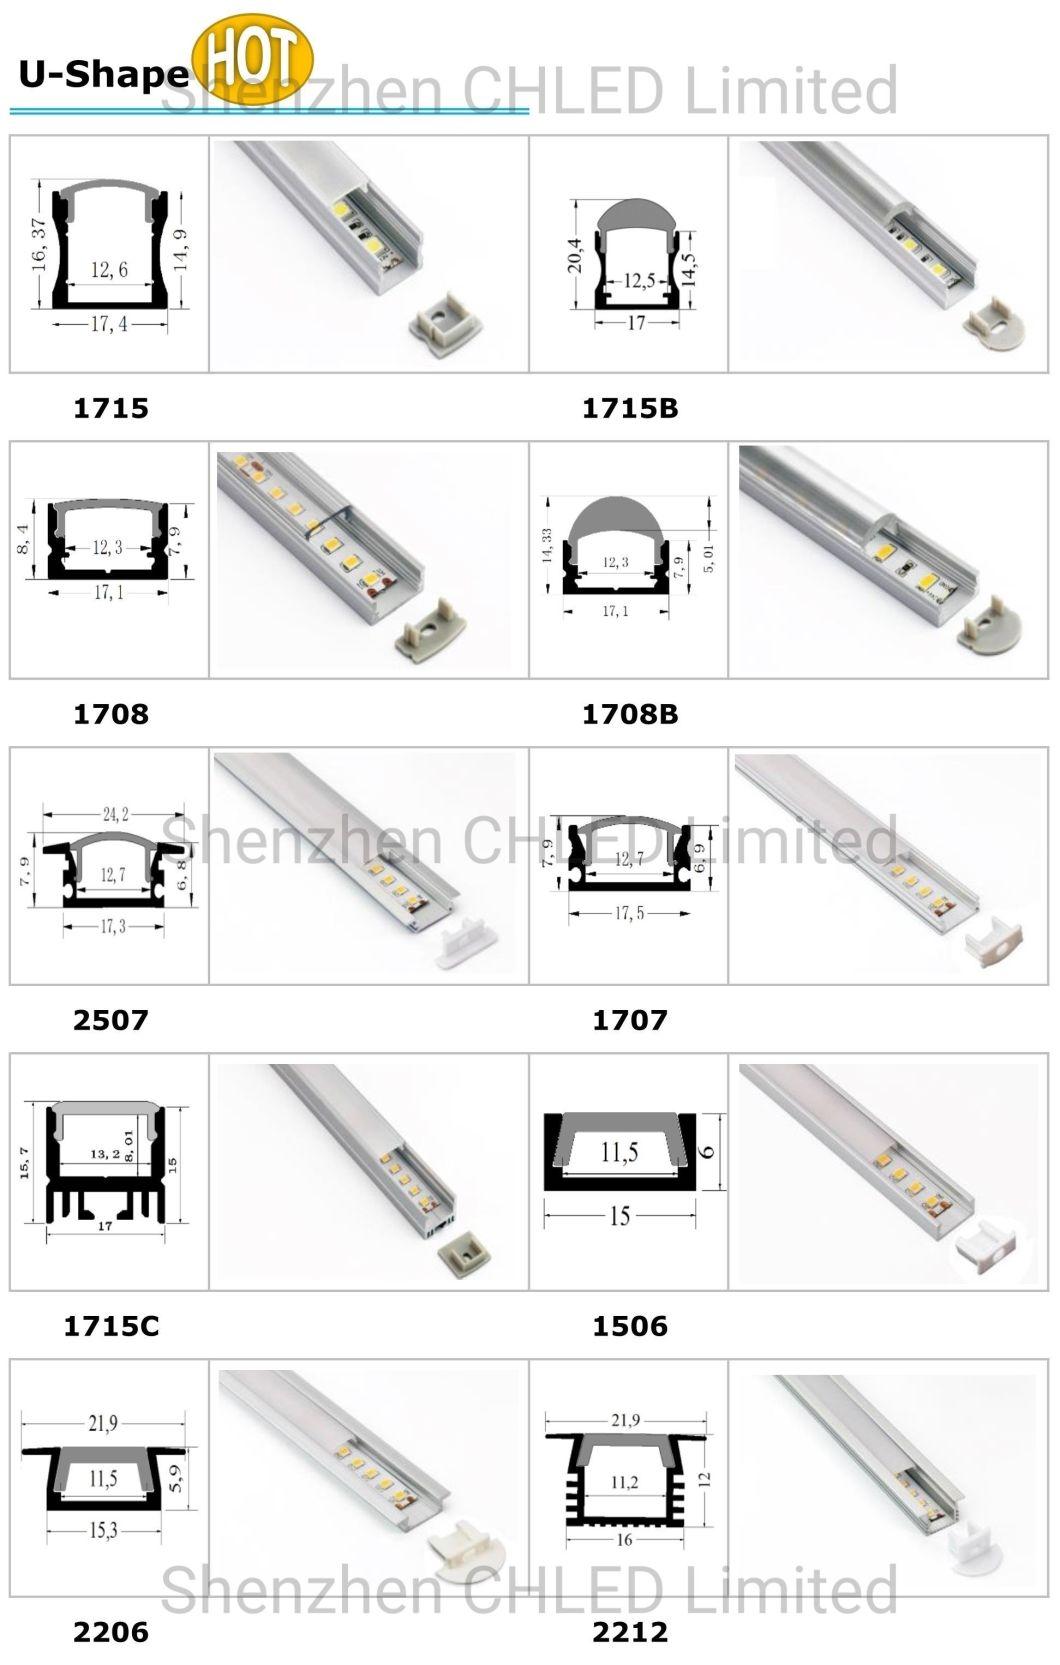 Anodized 6063 T5 Series LED Aluminium Extrusion Profiles Linear Light for Construction/Decoration/Industrial